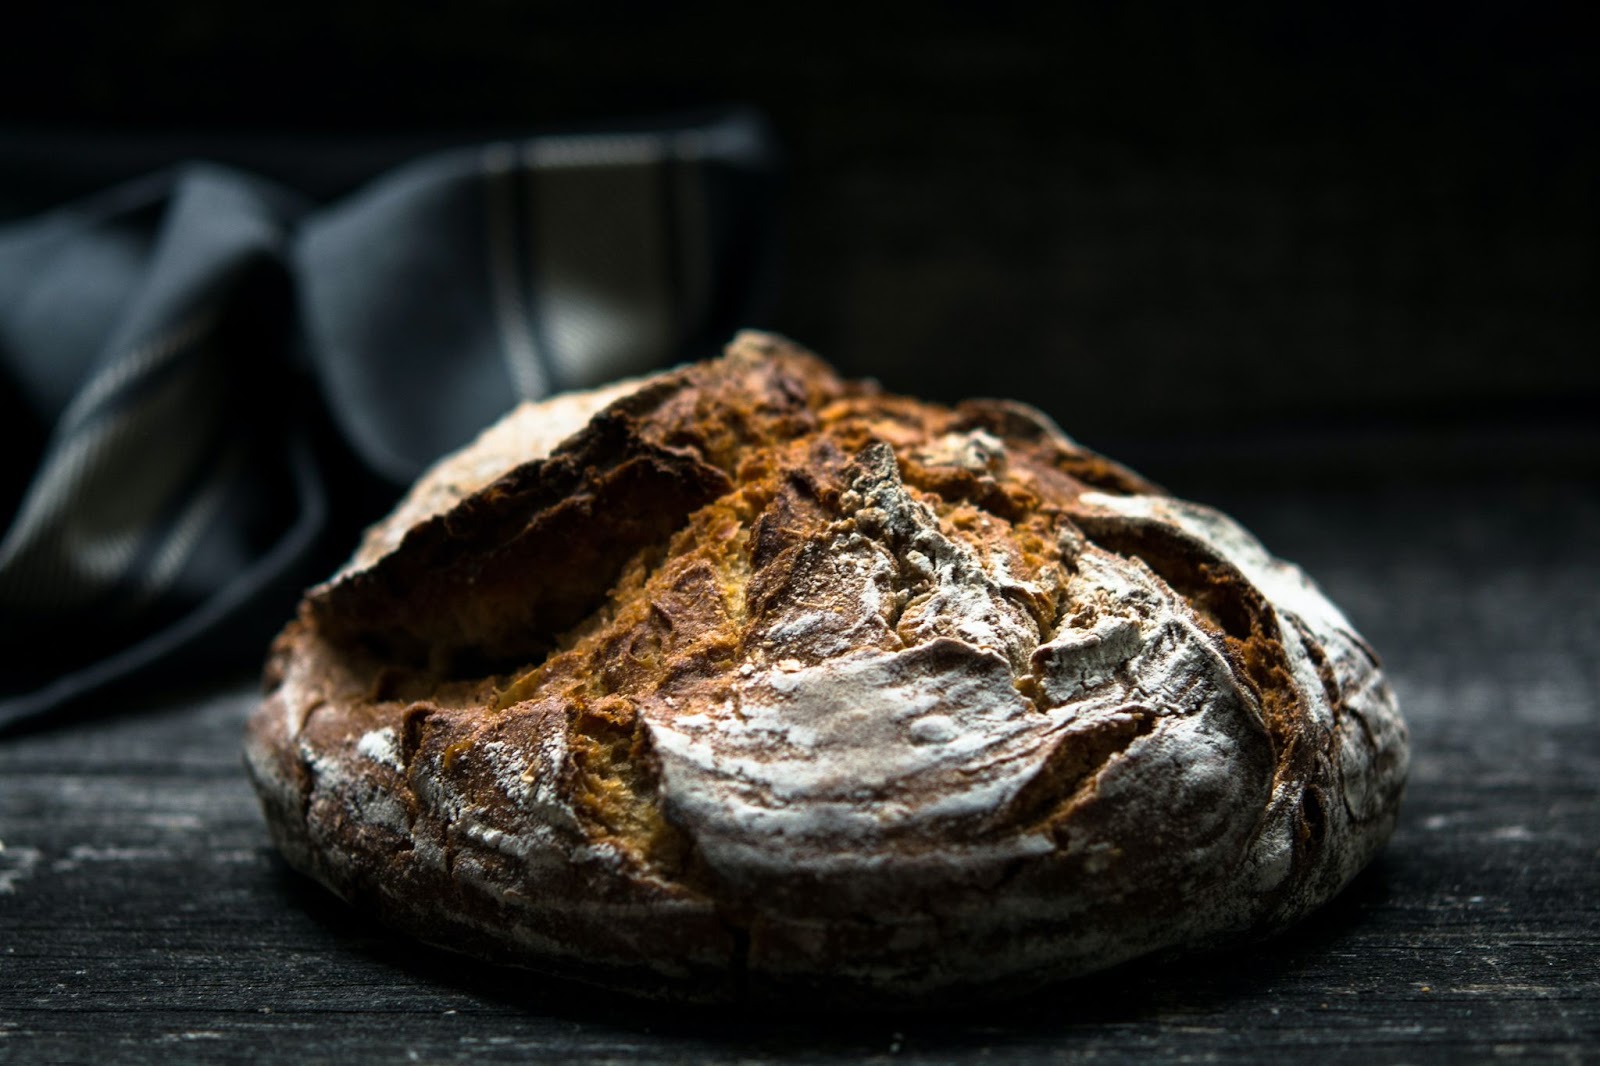 Oooh, the most premium looking of bread. Dark, rye dough in front of a black, silk curtain